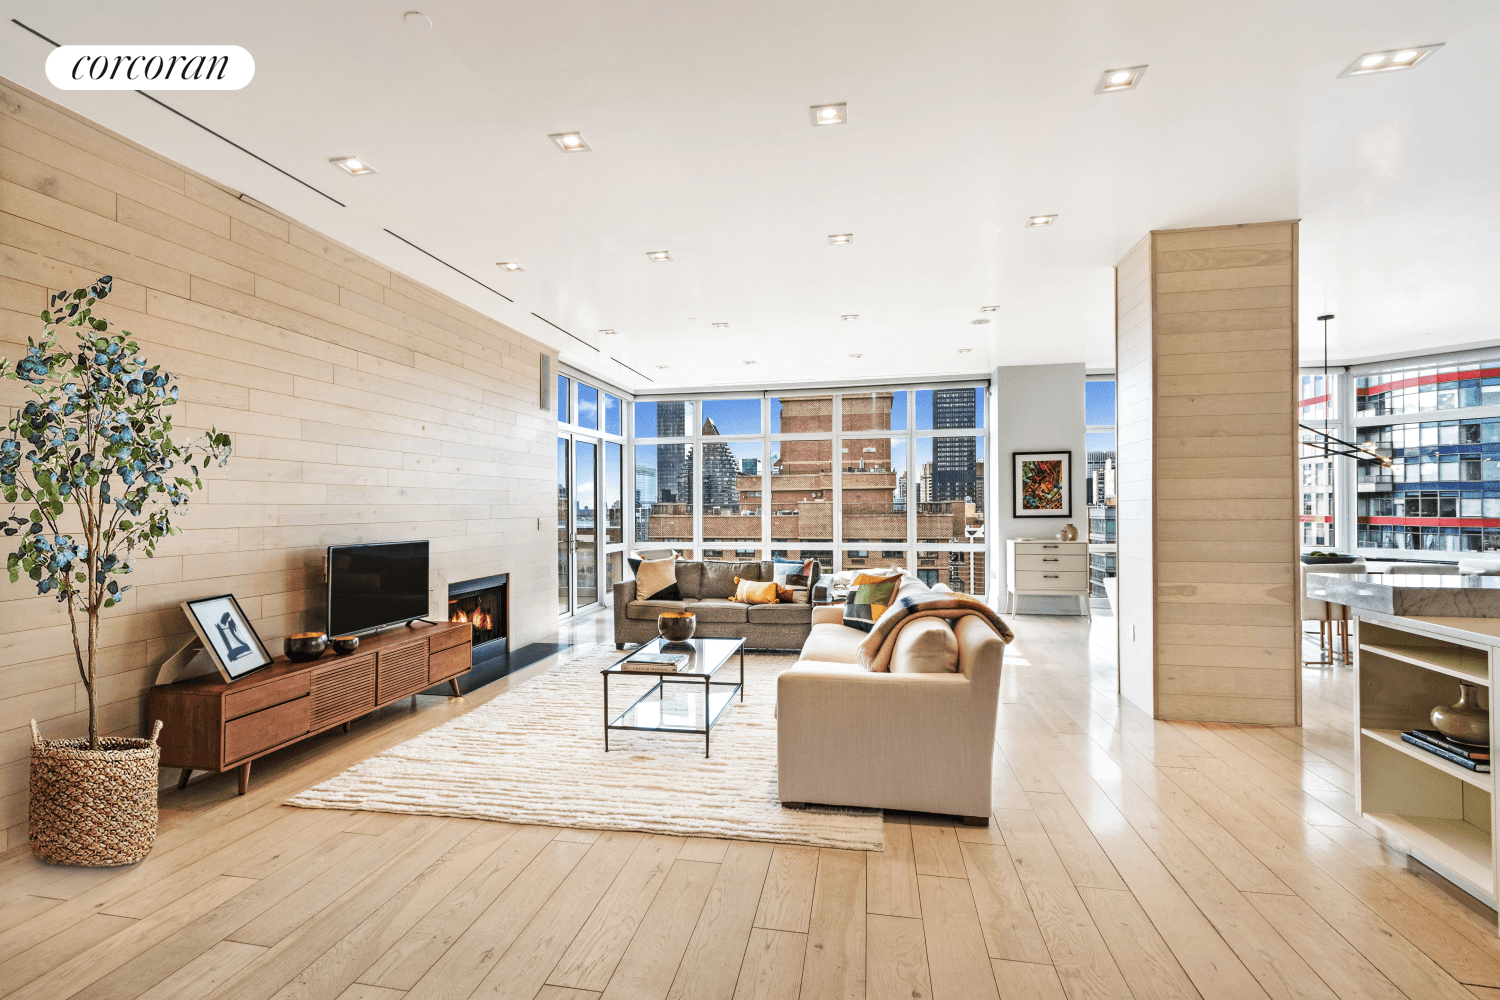 Penthouse B at the Milan Condominium offers City skyline and East River views with natural light from south, east and west exposures.